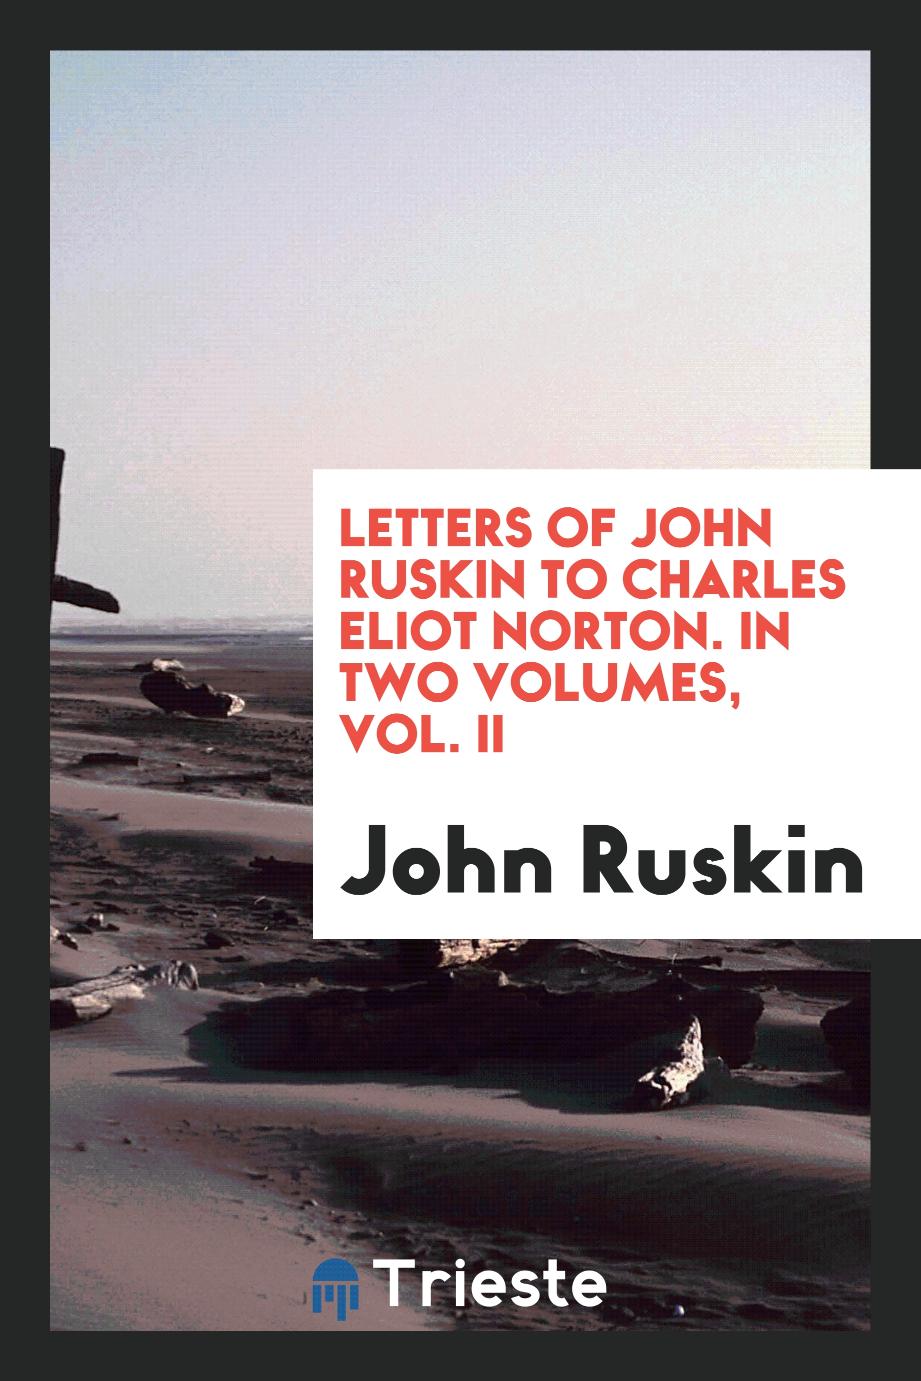 Letters of John Ruskin to Charles Eliot Norton. In two volumes, Vol. II